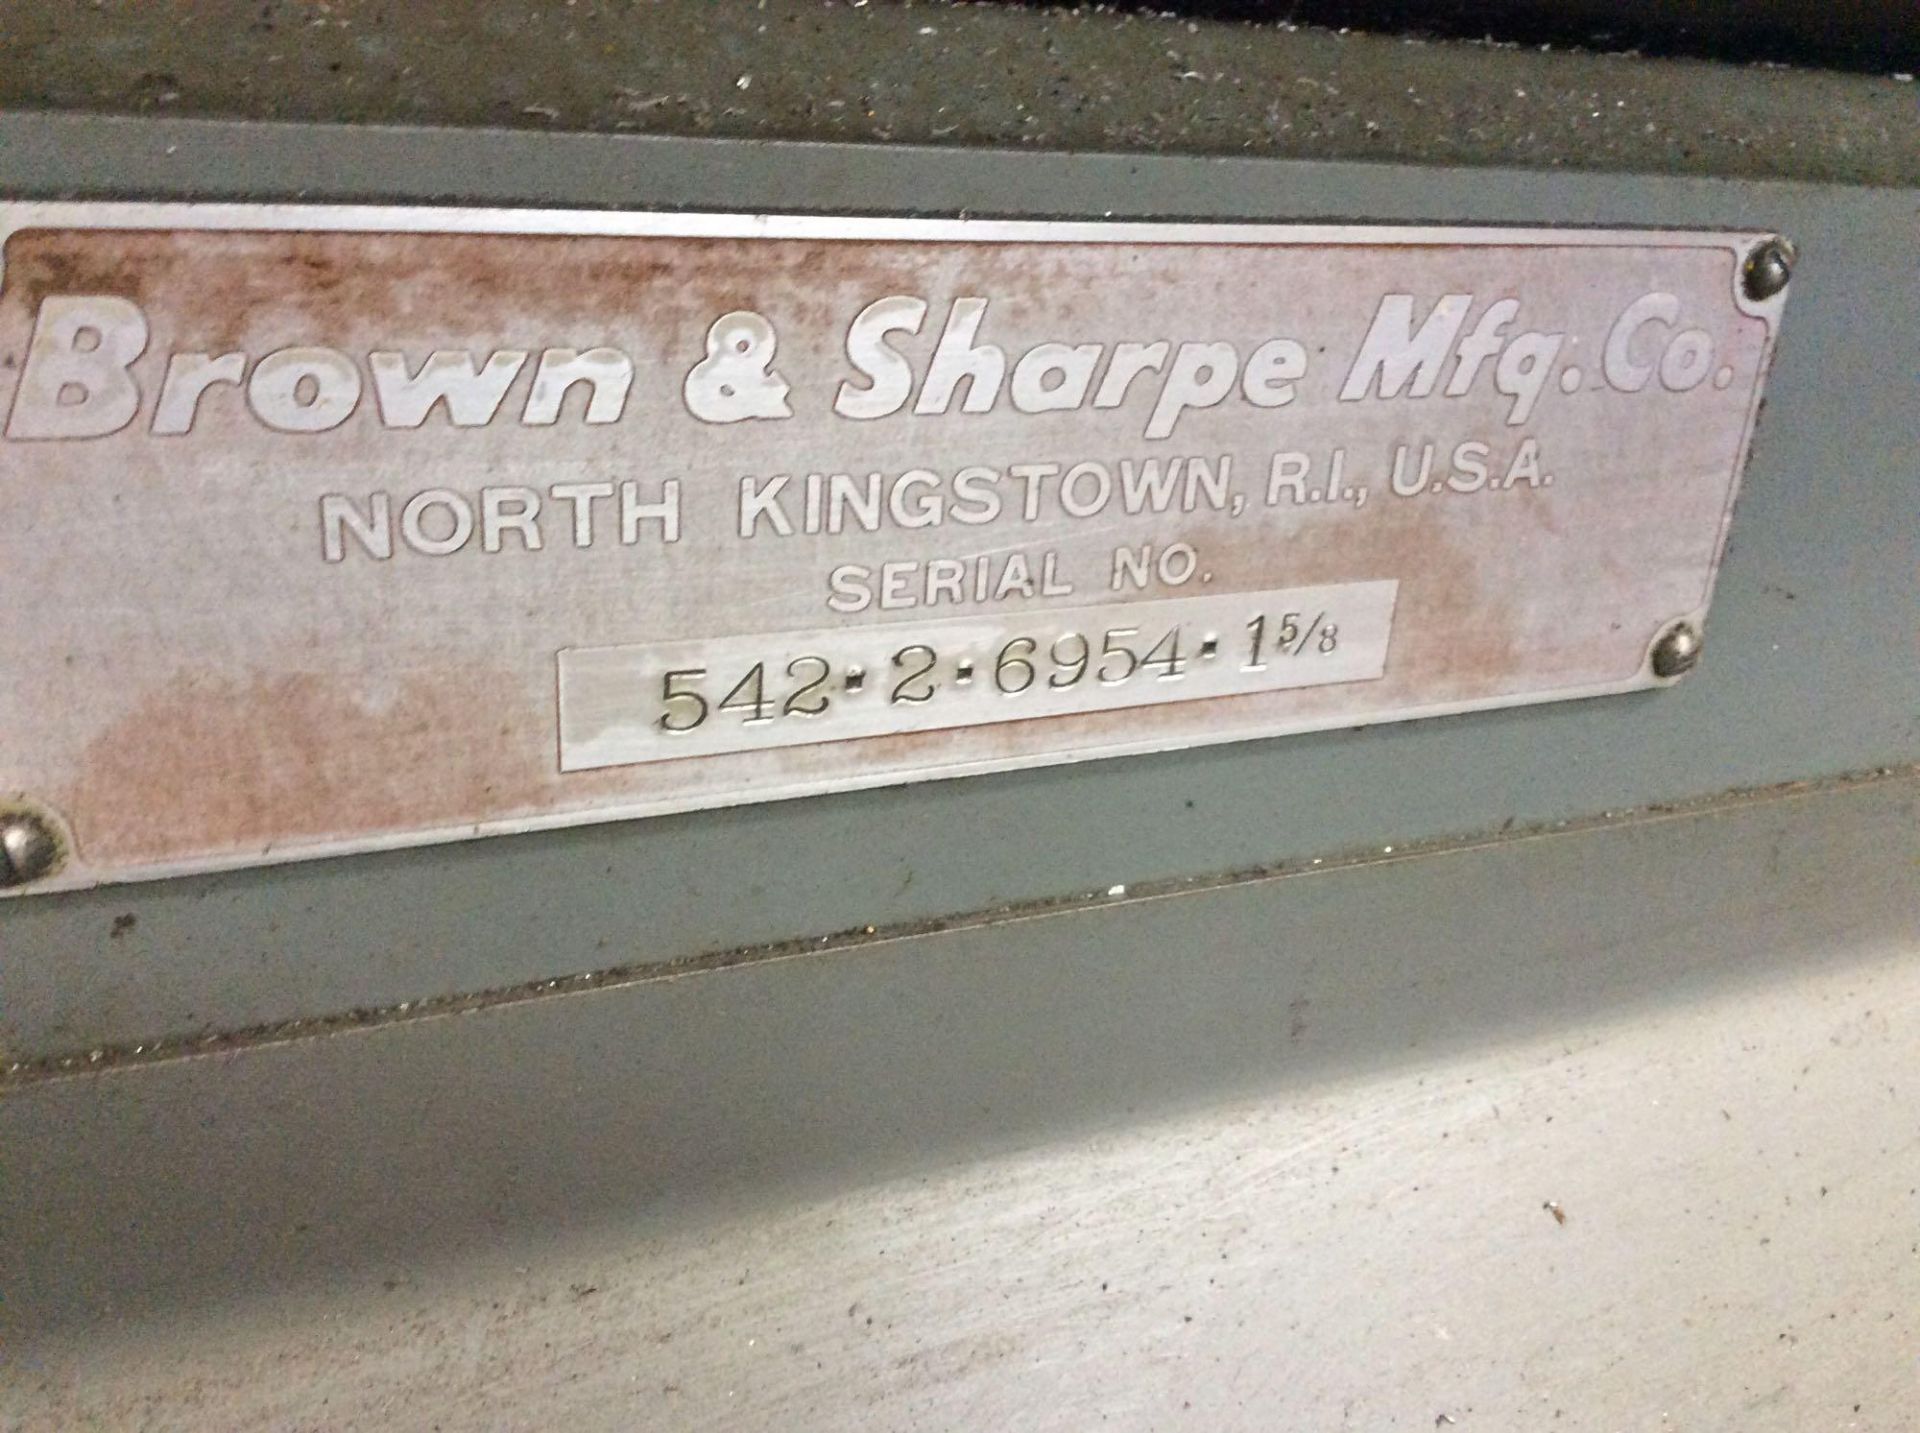 Brown and Sharpe square base automatic screw machine, mn 2, sn 542-2-6954, 1 5/8" capacity, 4 speeds - Image 6 of 7